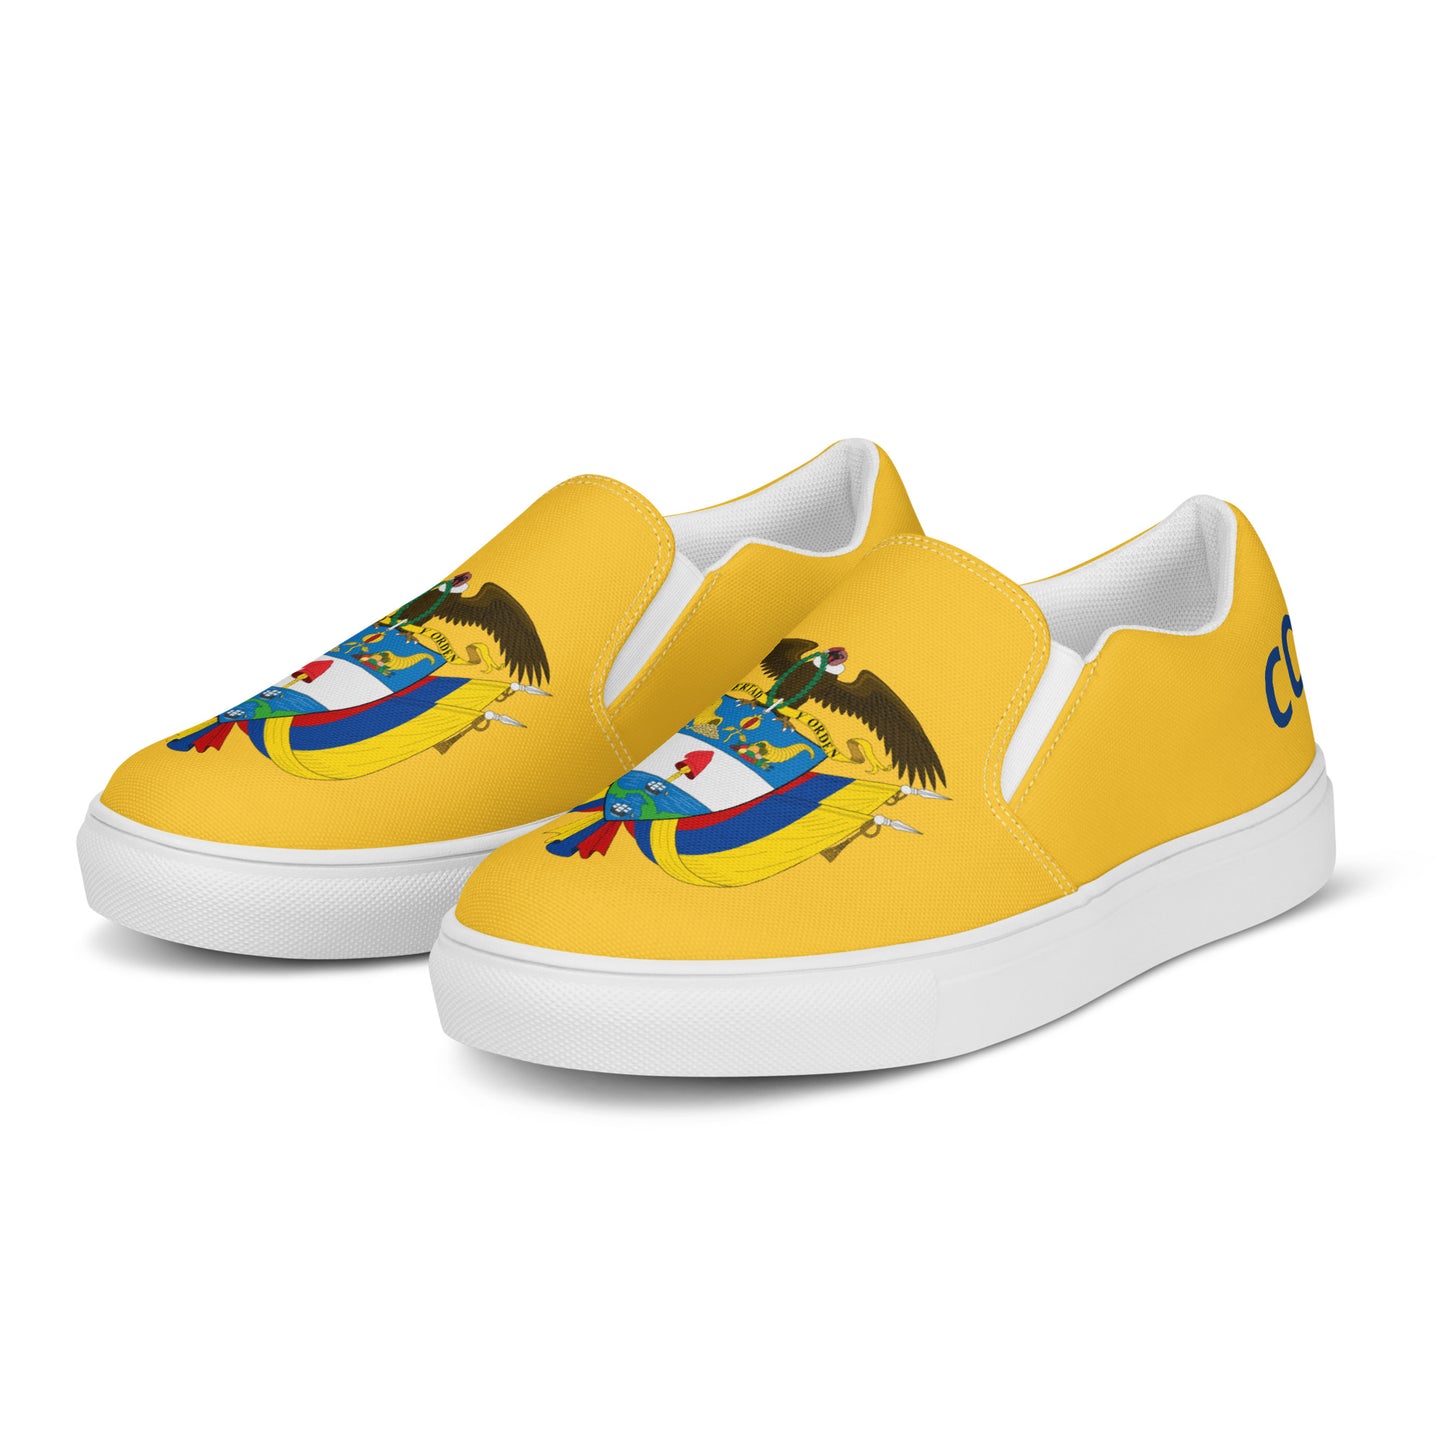 Colombia - Women - Yellow - Slip-on shoes